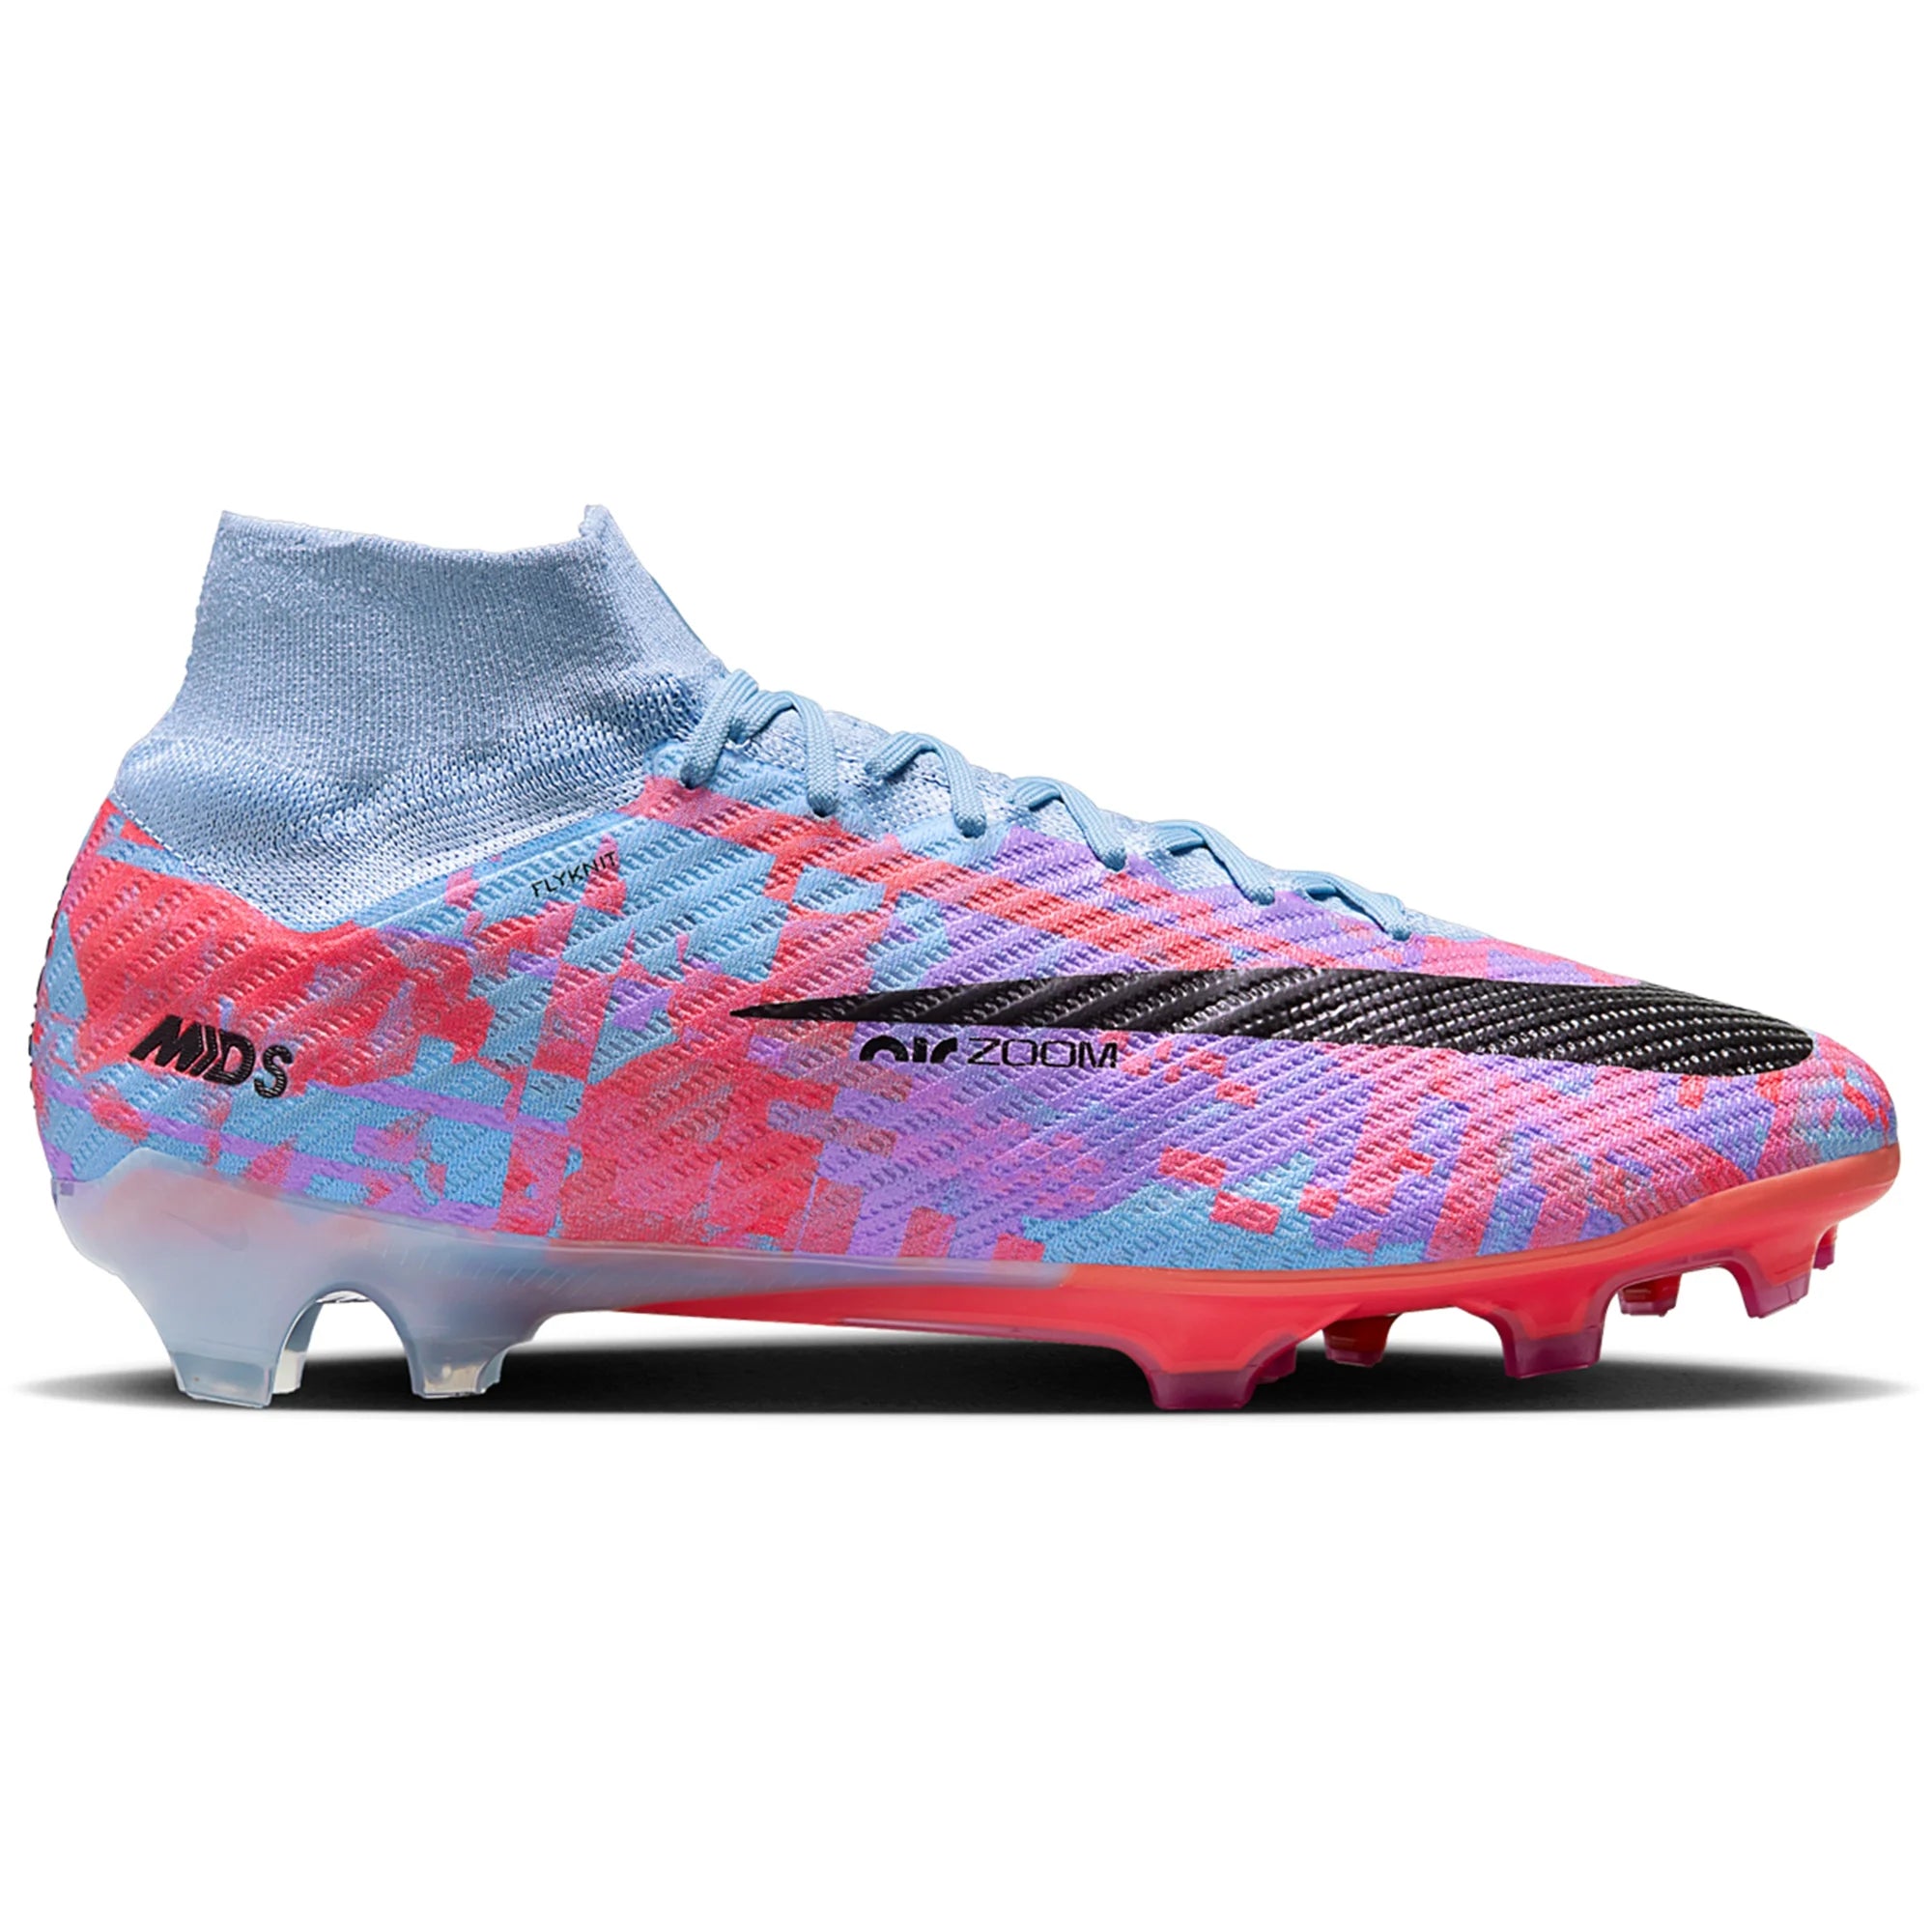 Nike Air Zoom Mercurial Dream Speed Superfly 9 FG Firm Soccer Cleat - Cobalt/Black/Fuchsia/Pink/Red DV2413-405 – Soccer Zone USA